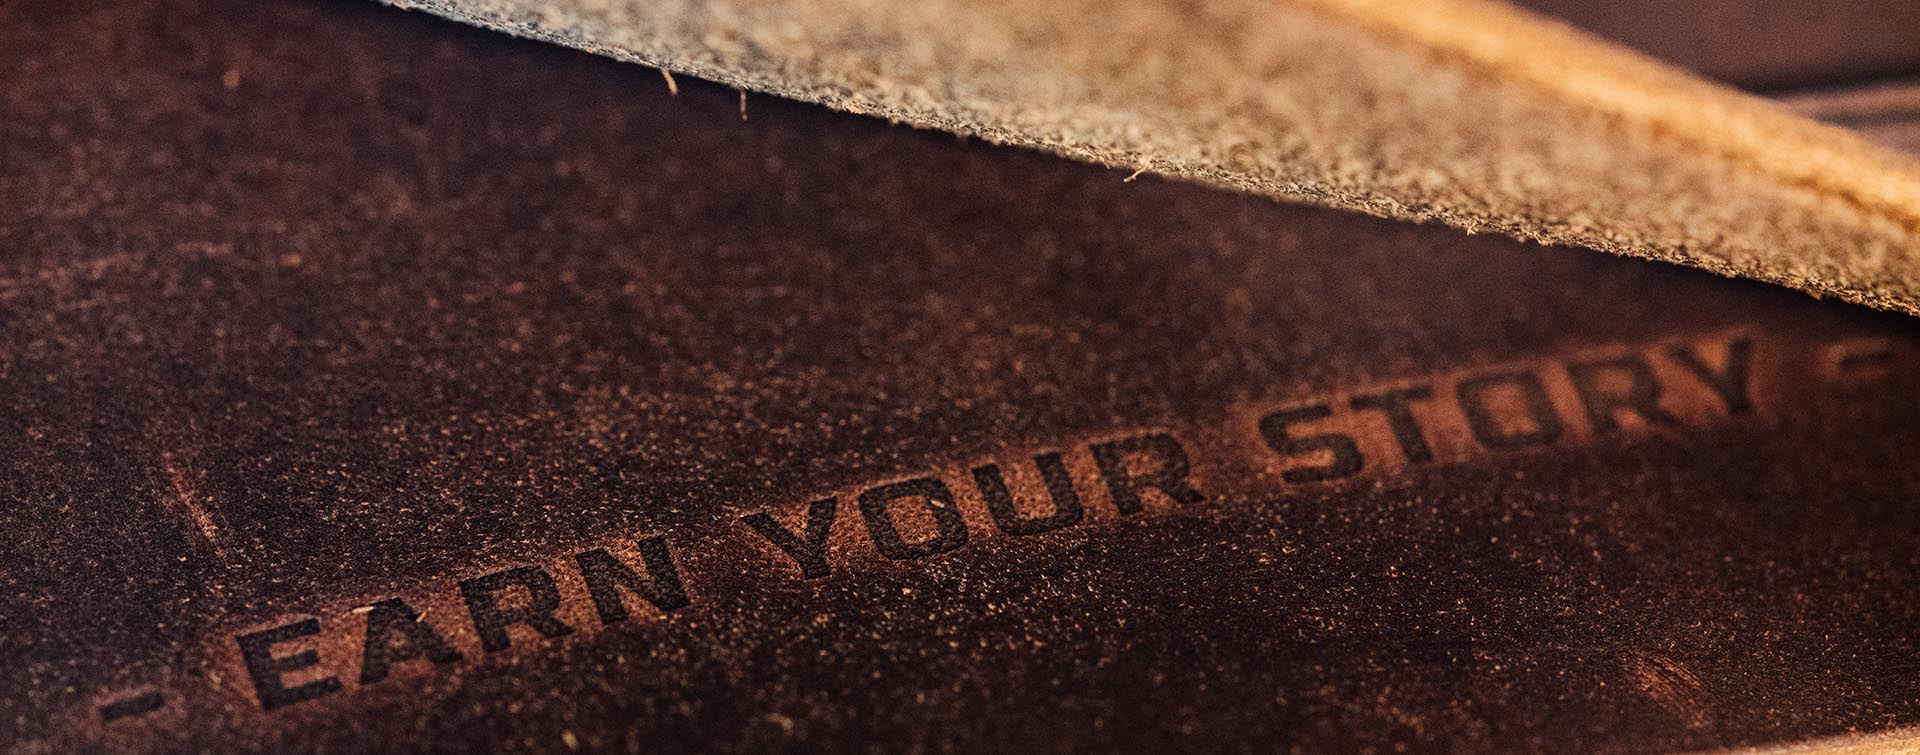 Trayvax slogs "earn your story" engraved in horween top-grain leather